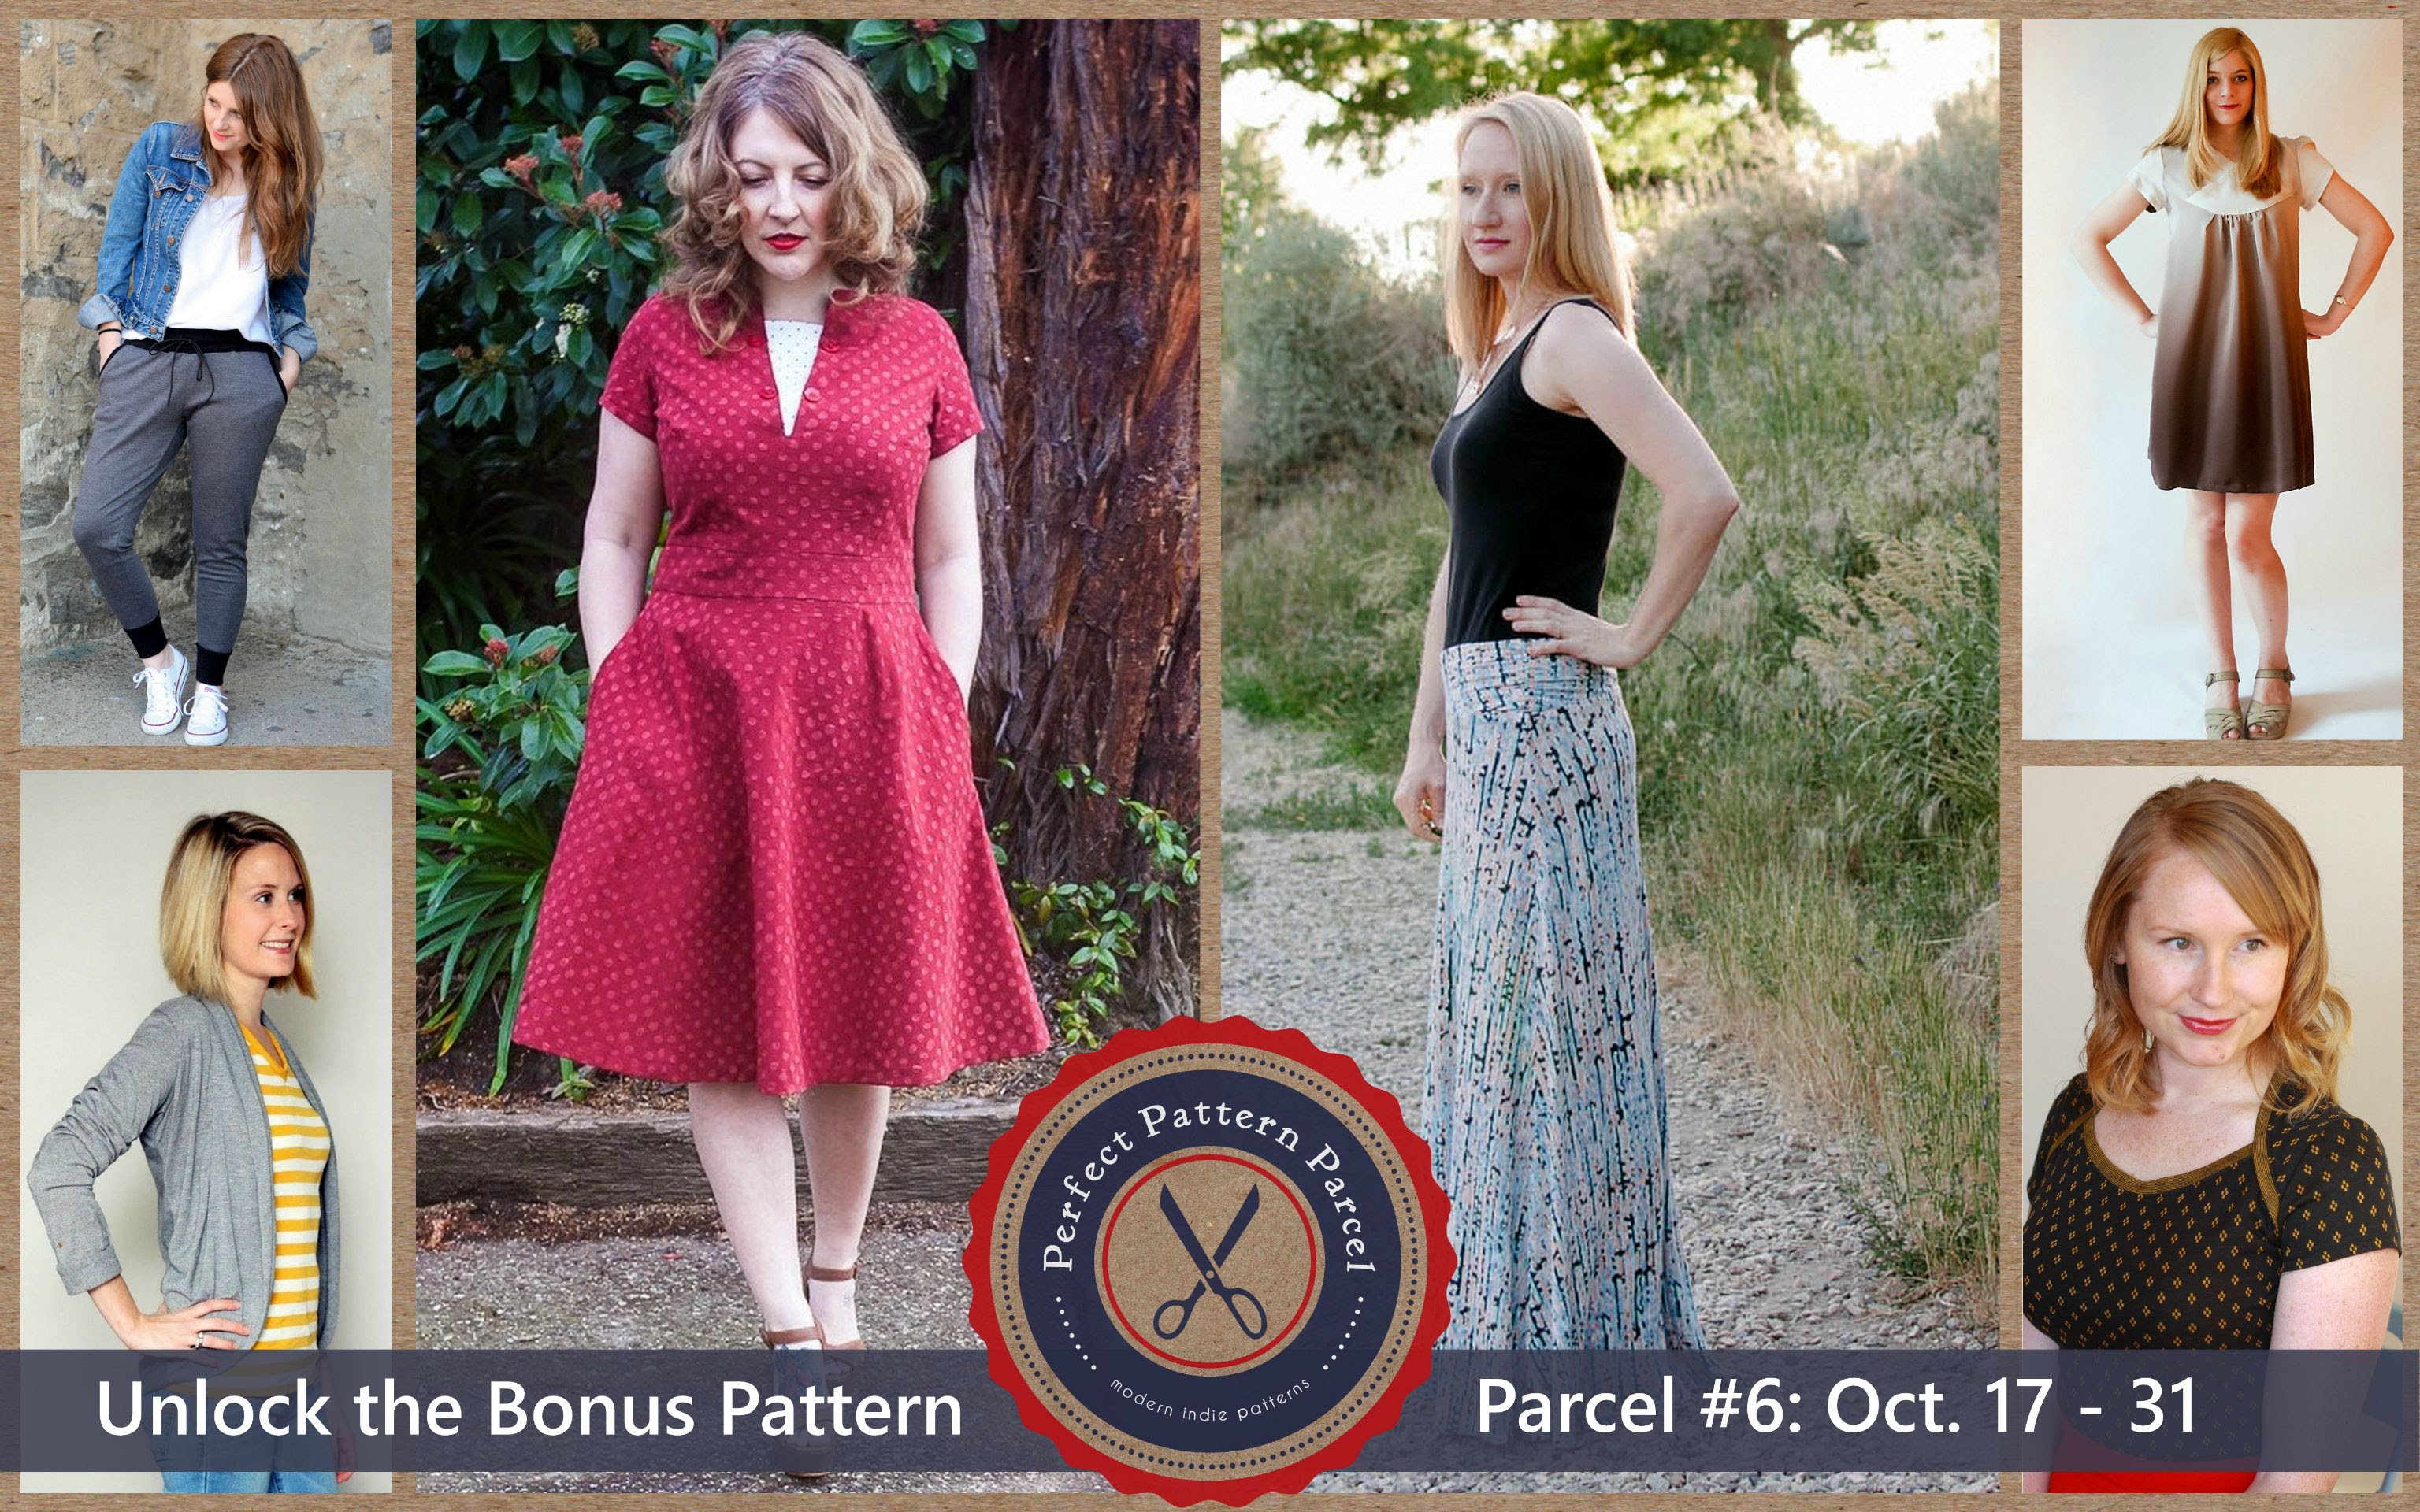 Pattern Parcel #6: Choose your own price and support DonorsChoose. Win/win